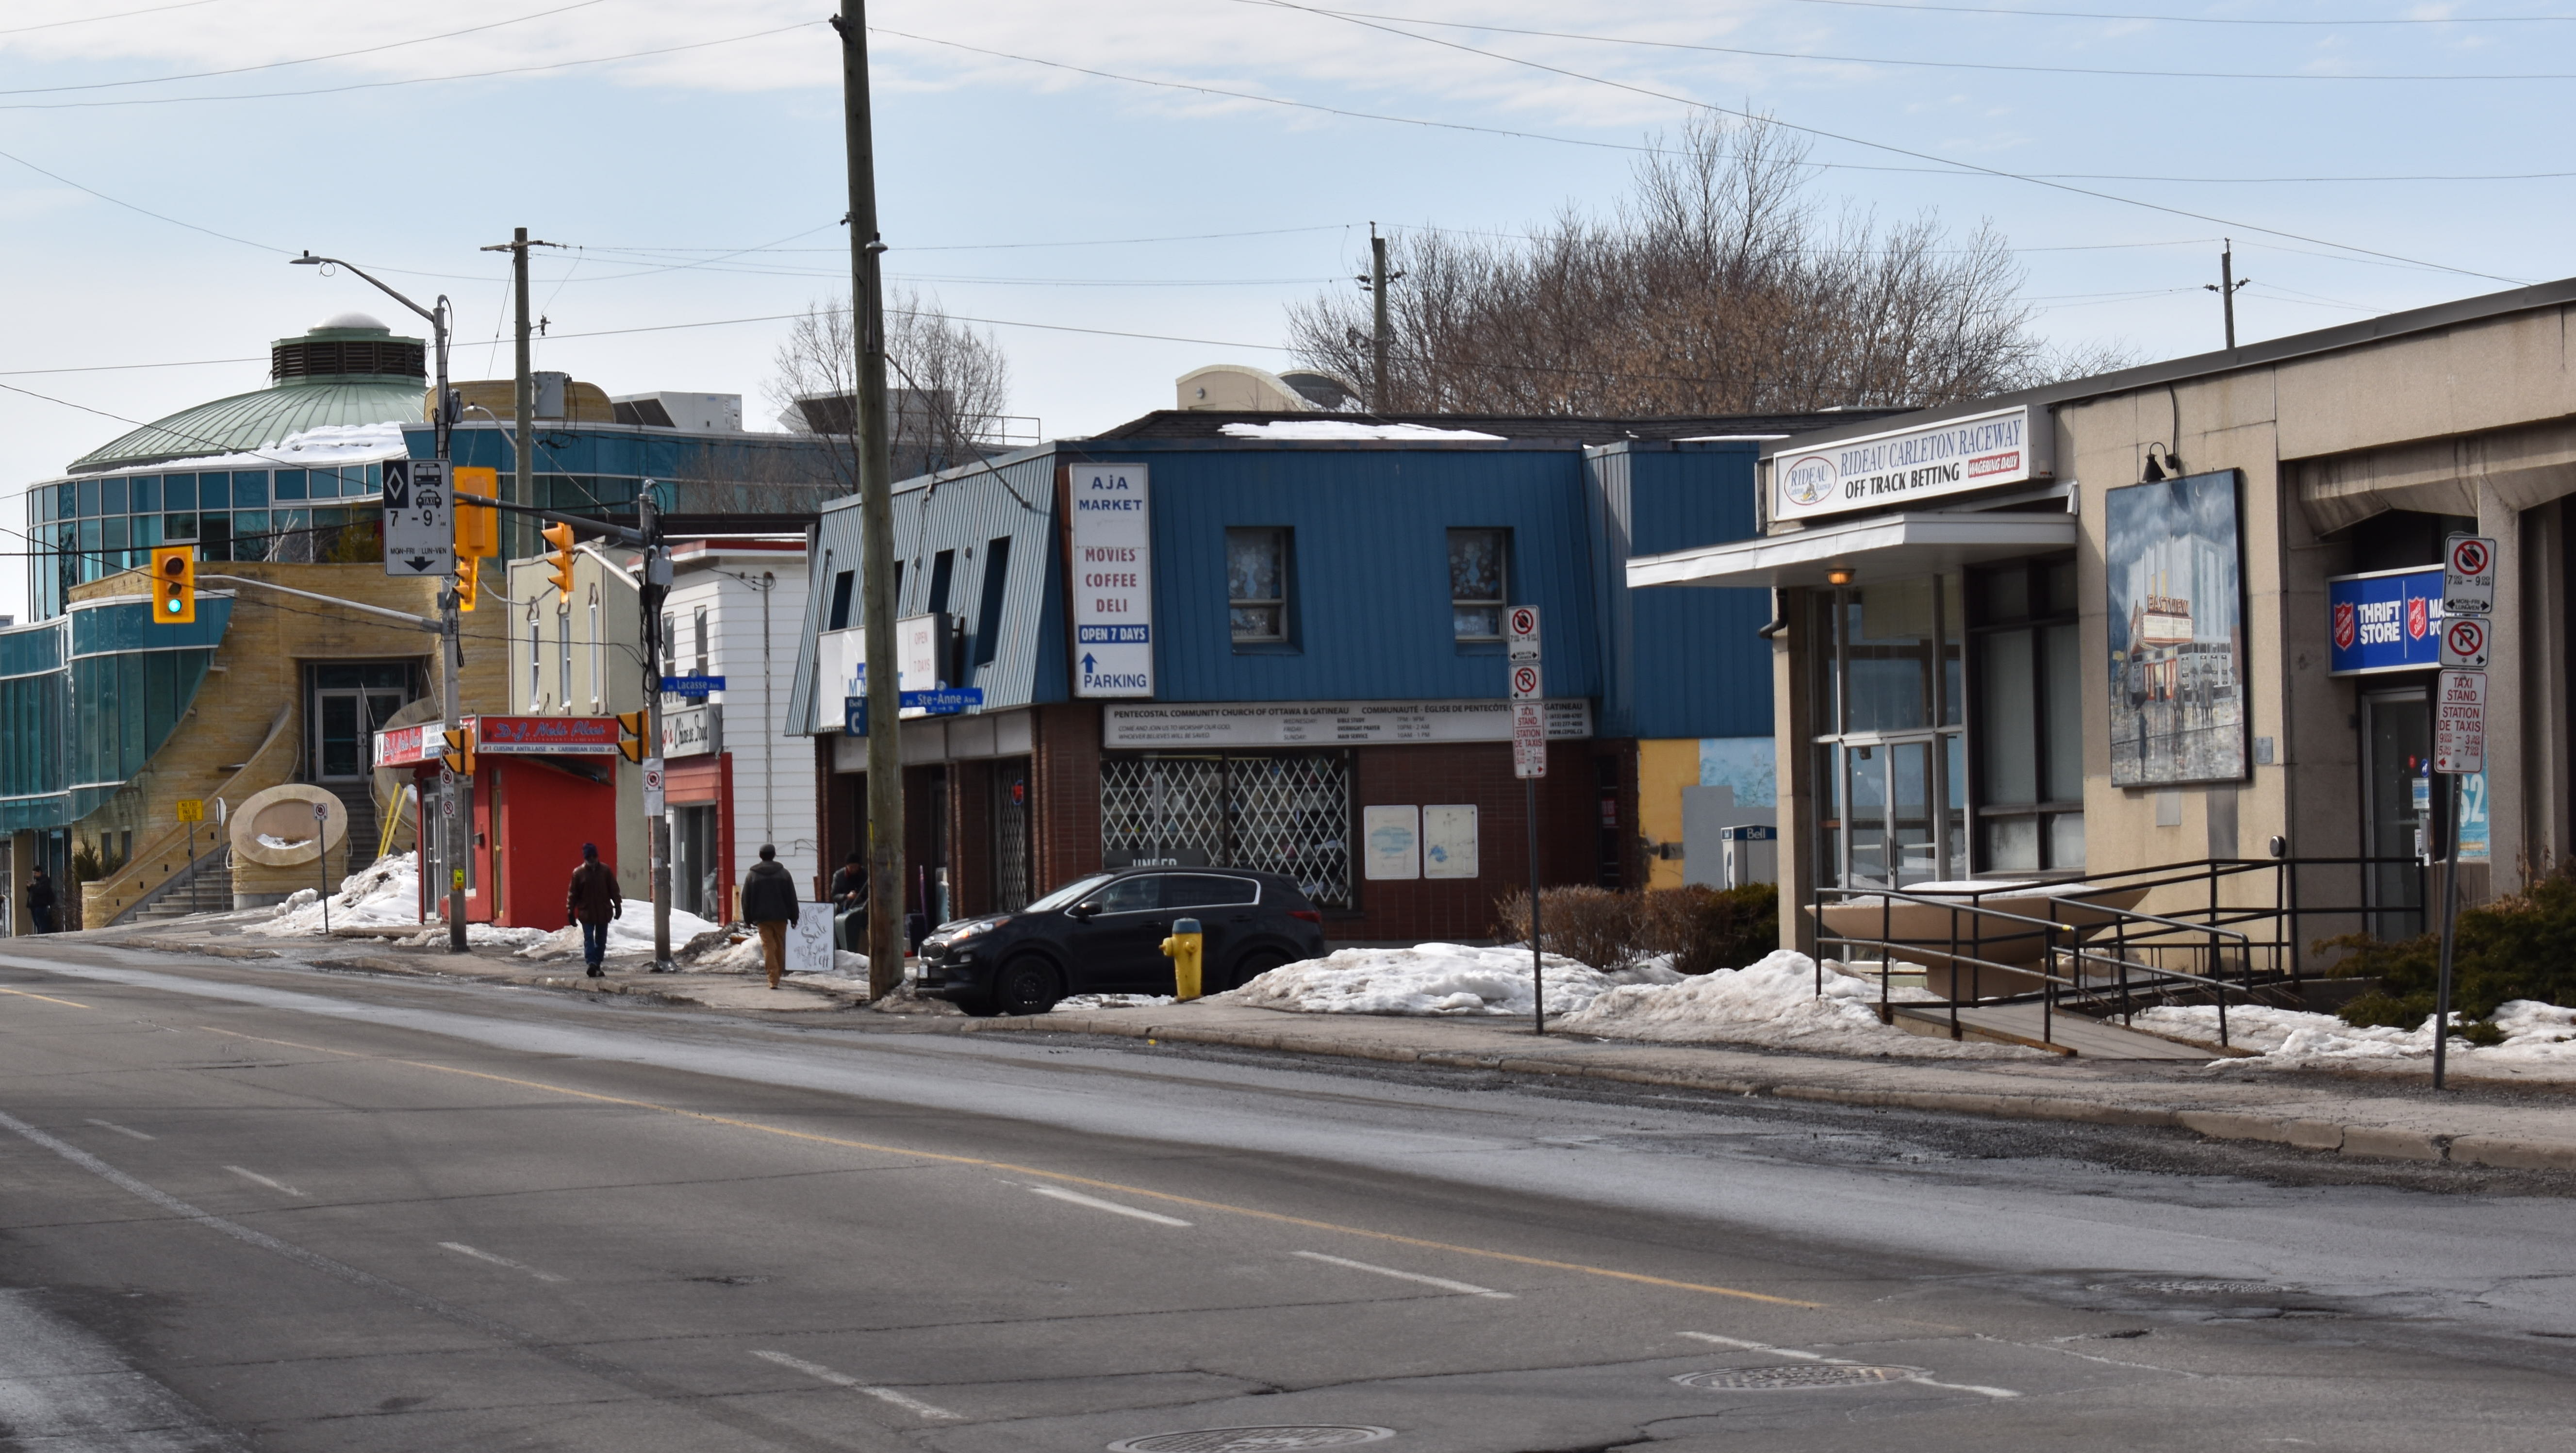 A view of Montreal Road from the right side, showing the Ottawa Bazaar and Salvation Army building on the left. 